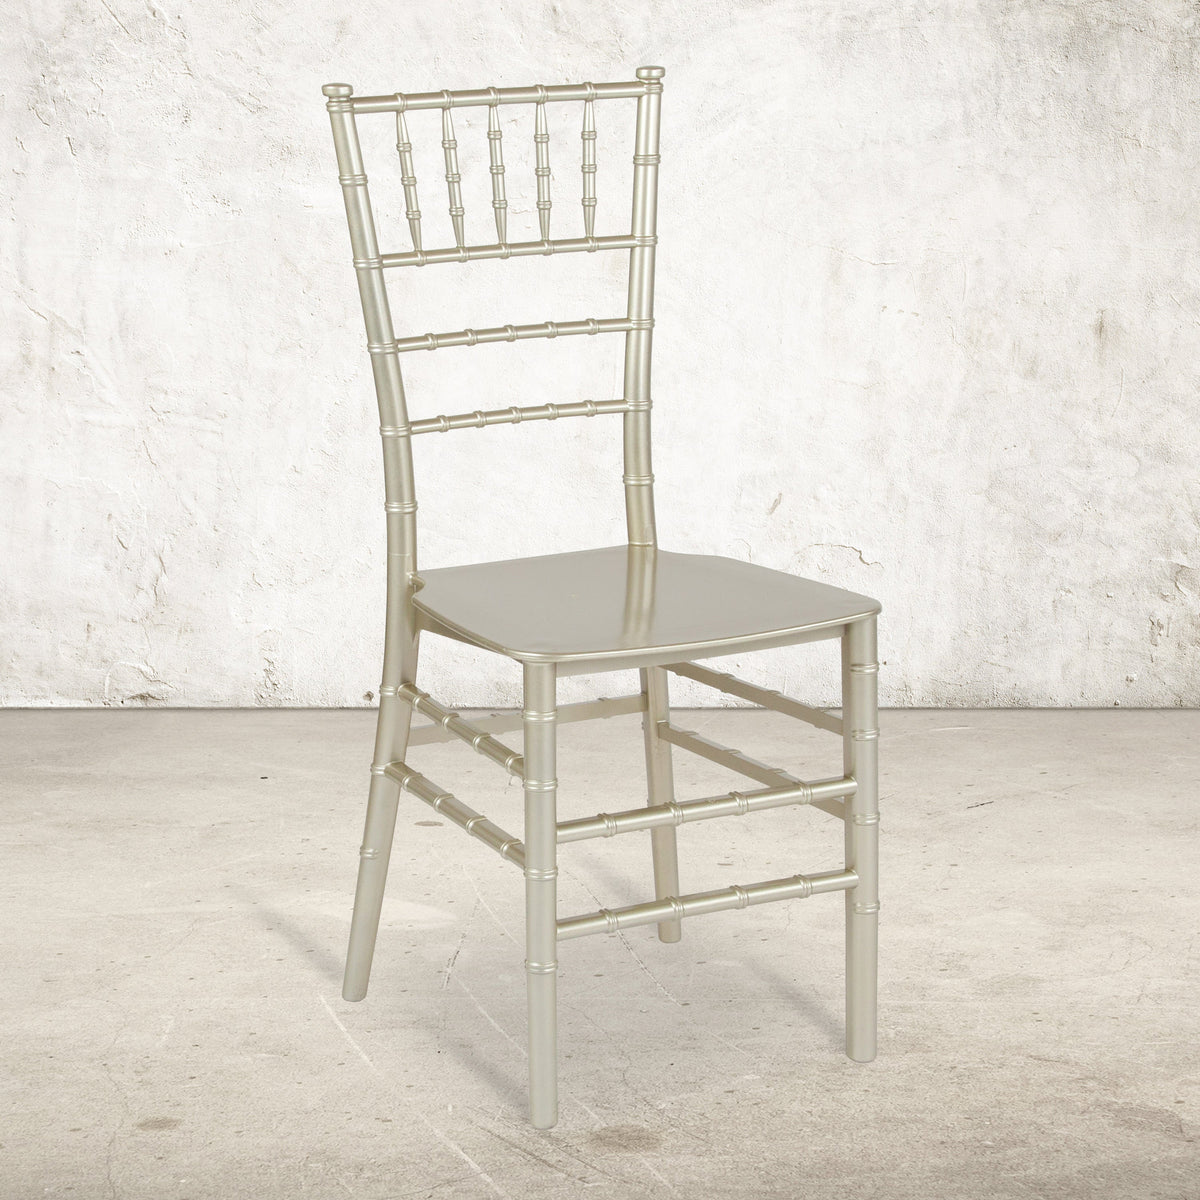 Champagne |#| Champagne Stackable Resin Chiavari Chair - Hospitality and Event Seating